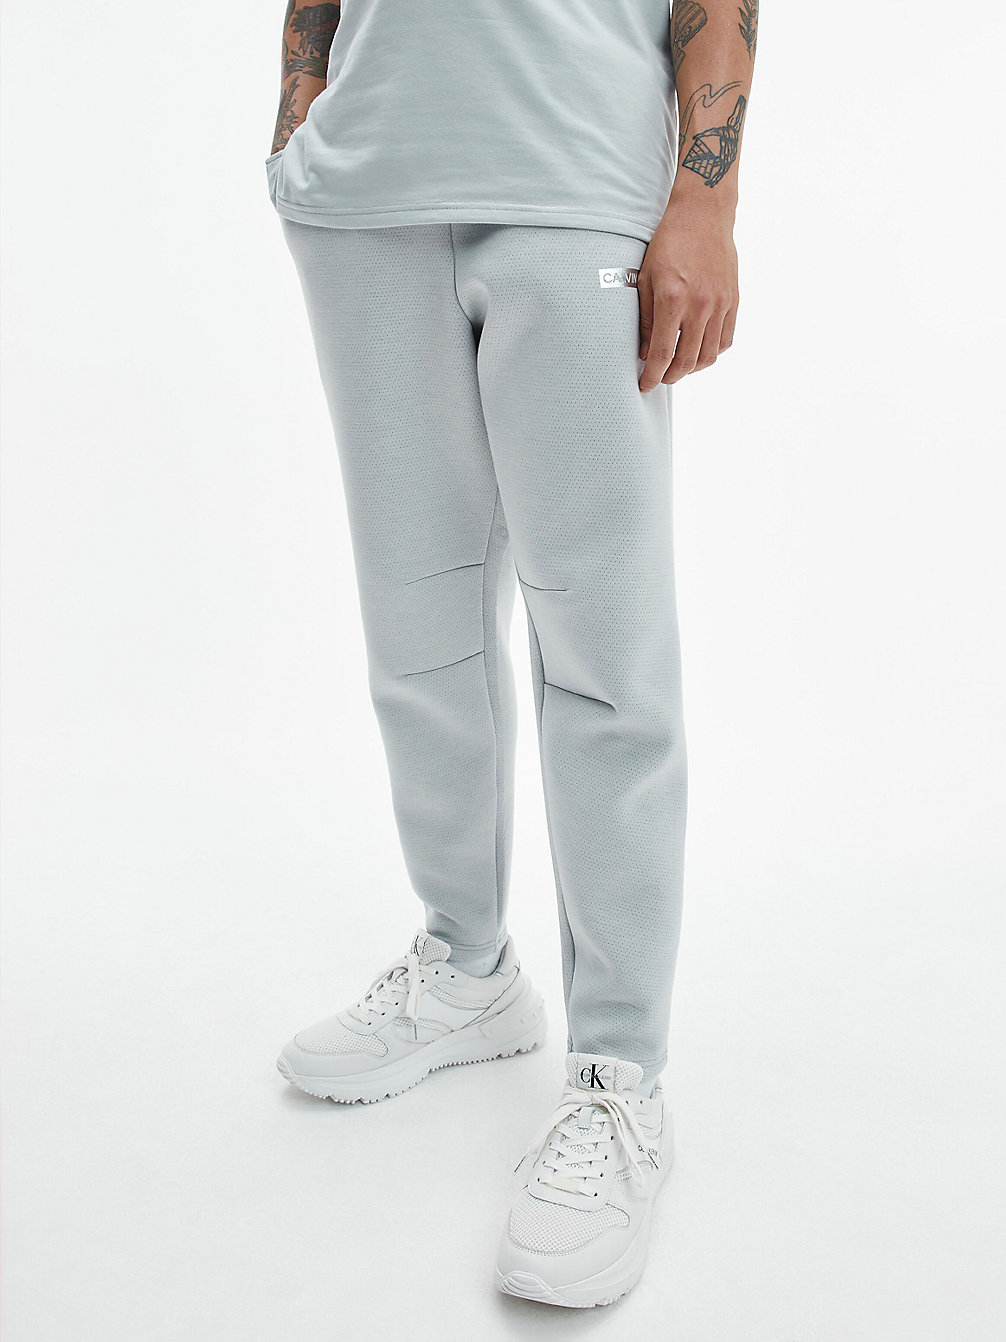 HIGH RISE / CYBER YELLOW Tapered Joggers undefined men Calvin Klein